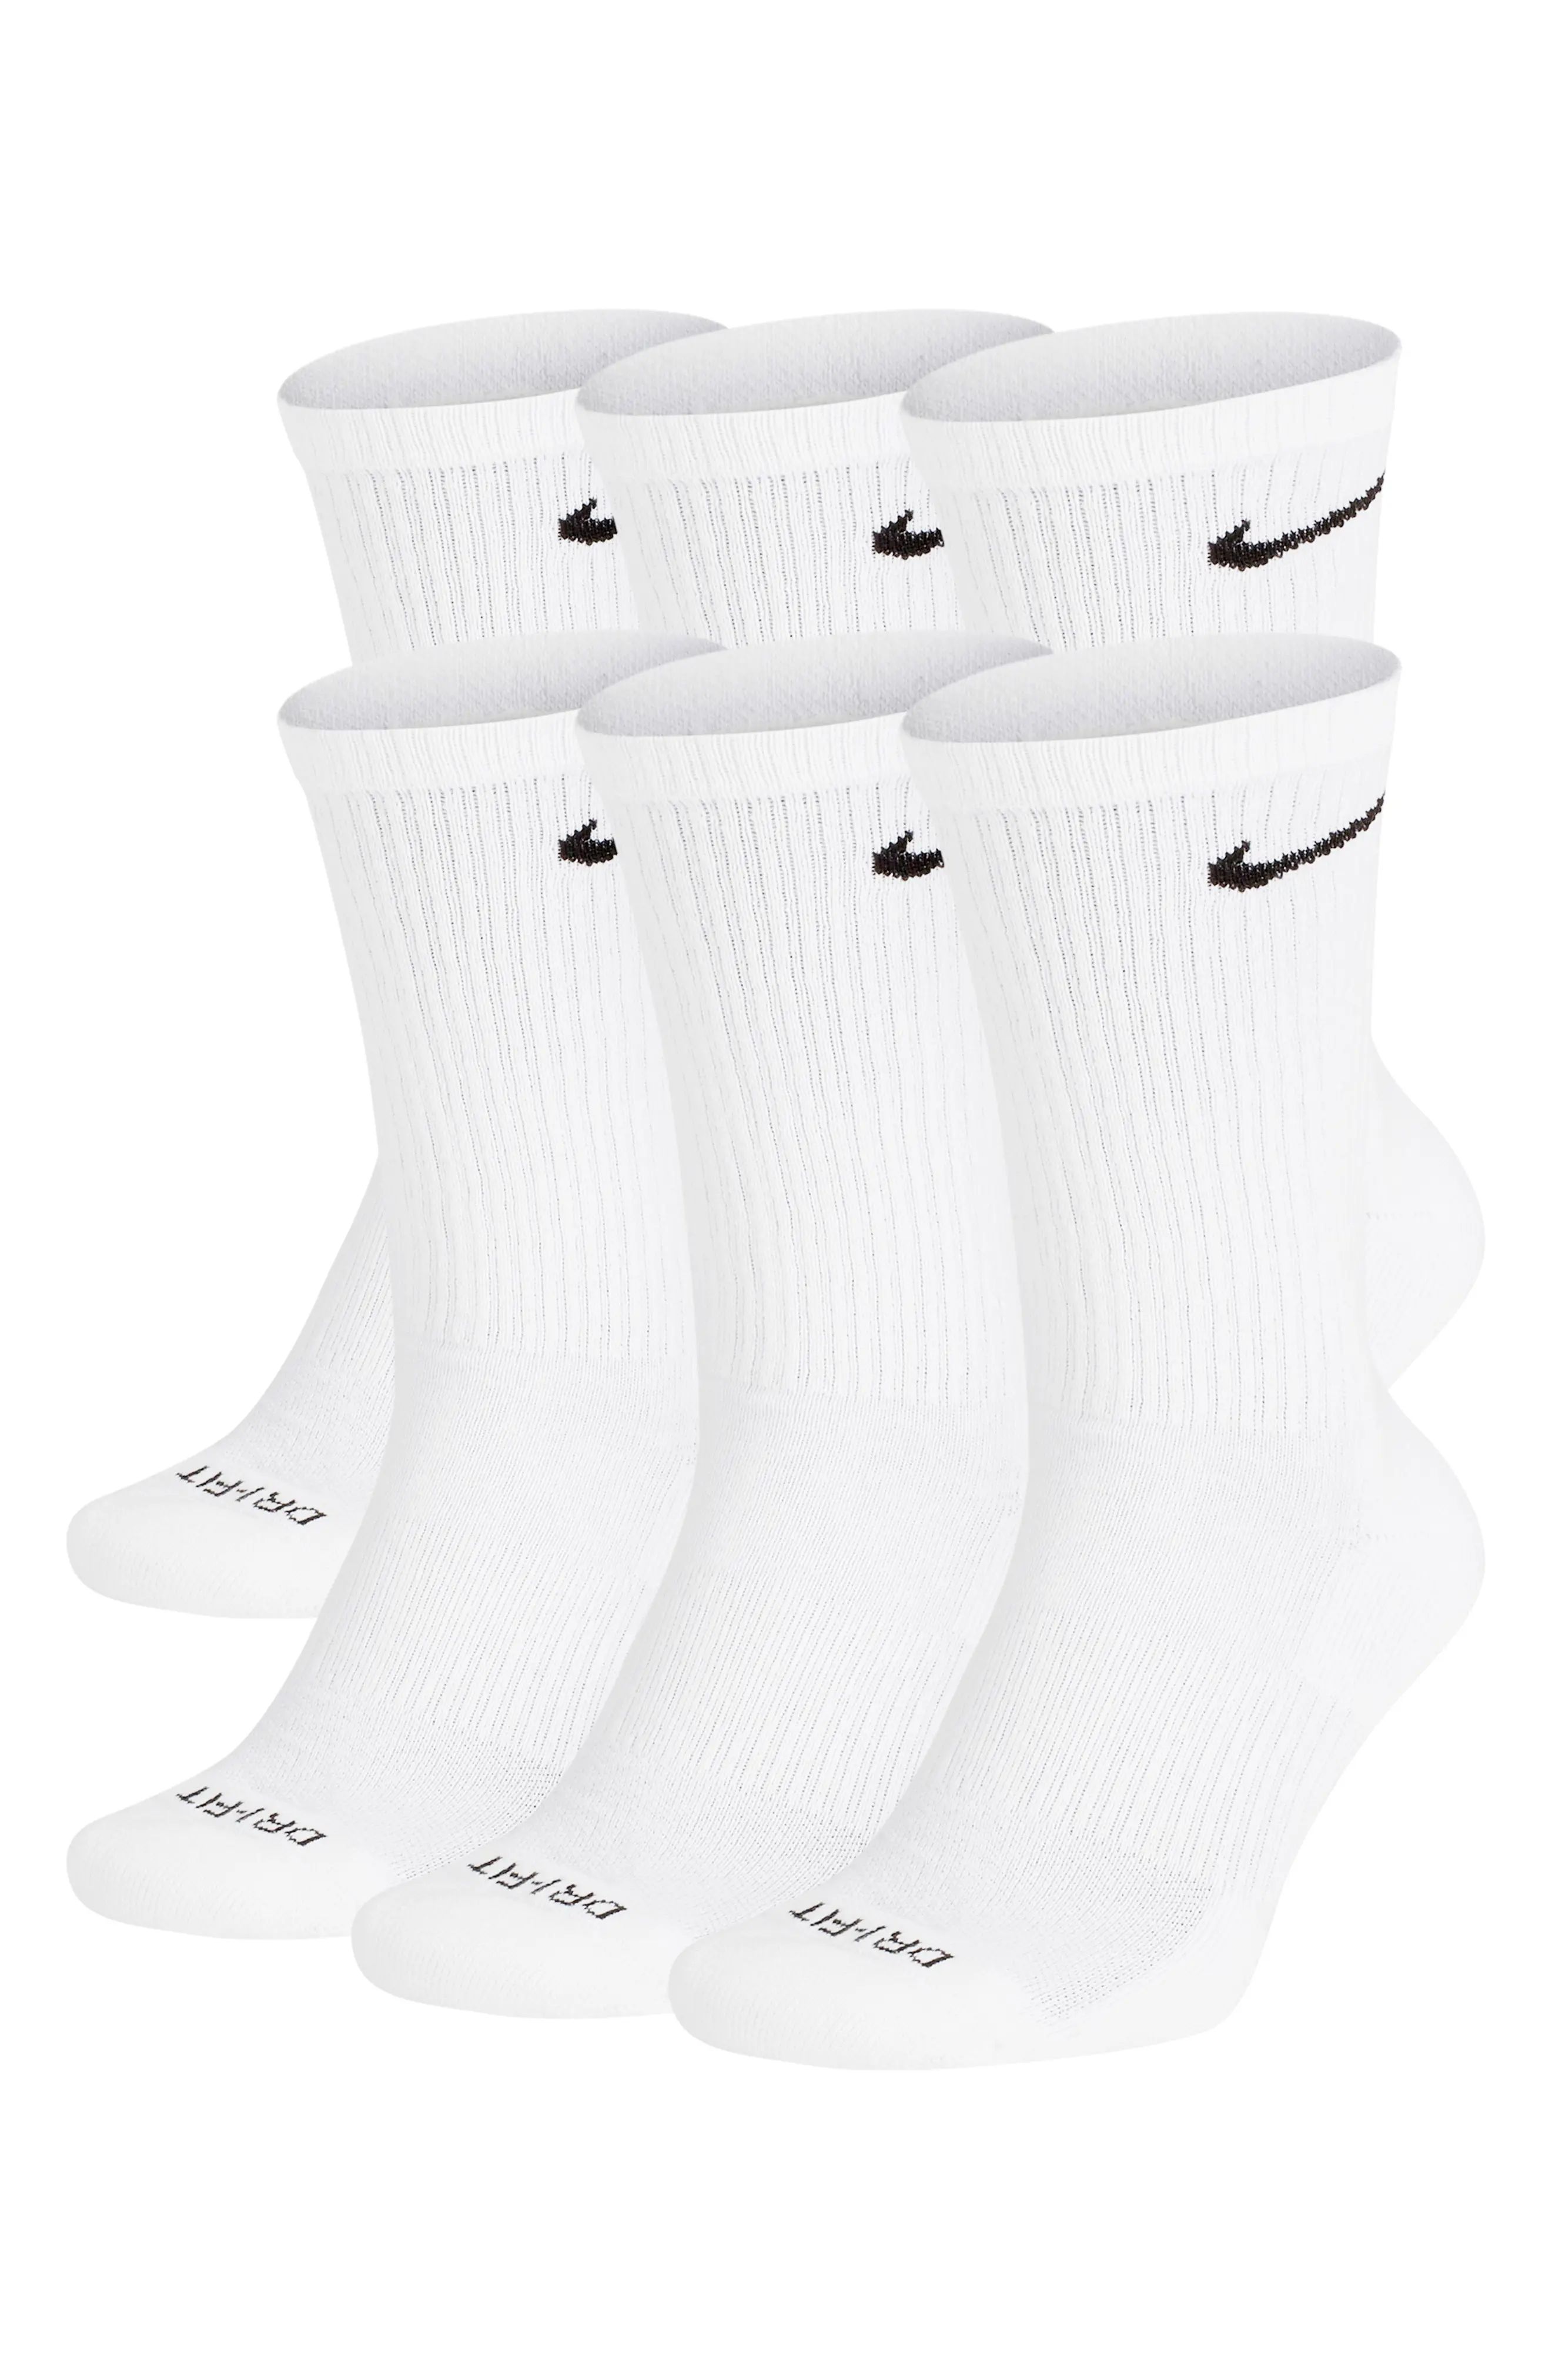 Nike Dry 6-Pack Everyday Plus Cushion Crew Training Socks in White/Black at Nordstrom, Size Large | Nordstrom